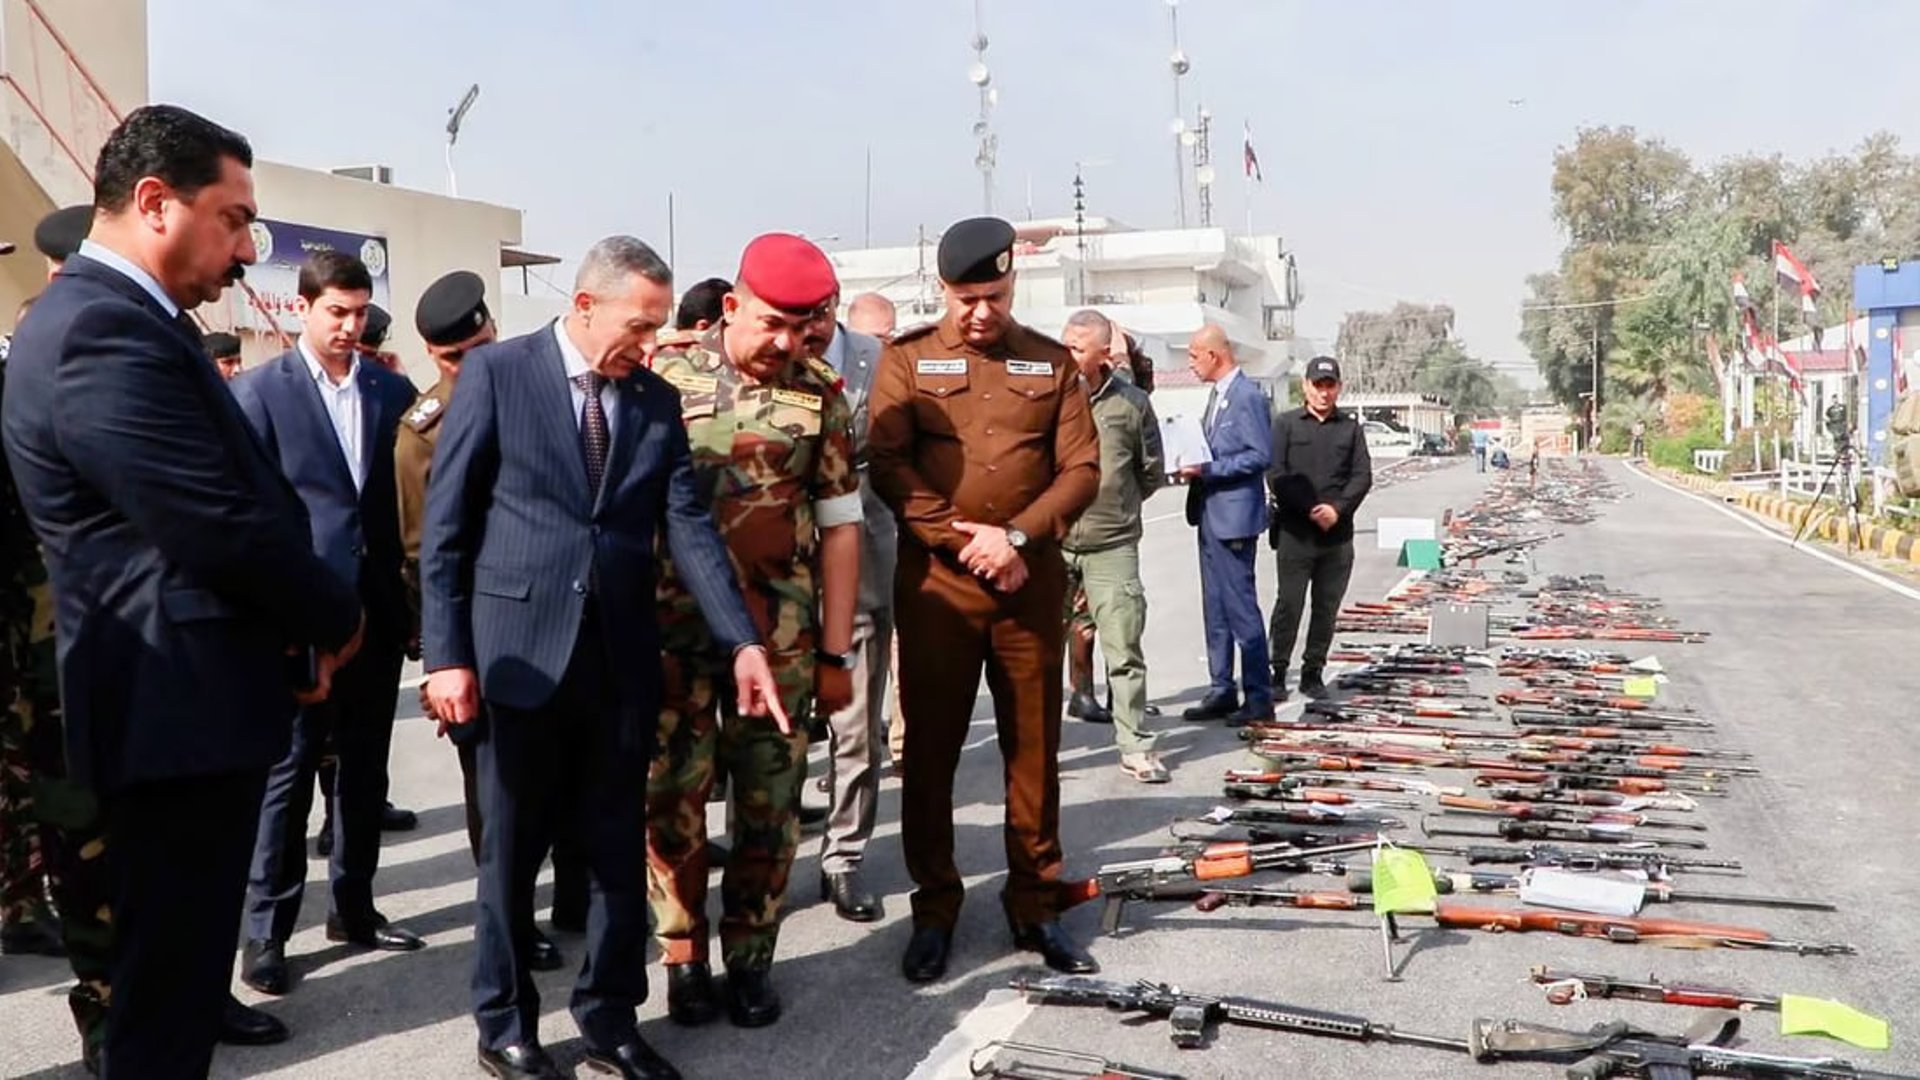 Wasit police seize weapons thousands of weapons